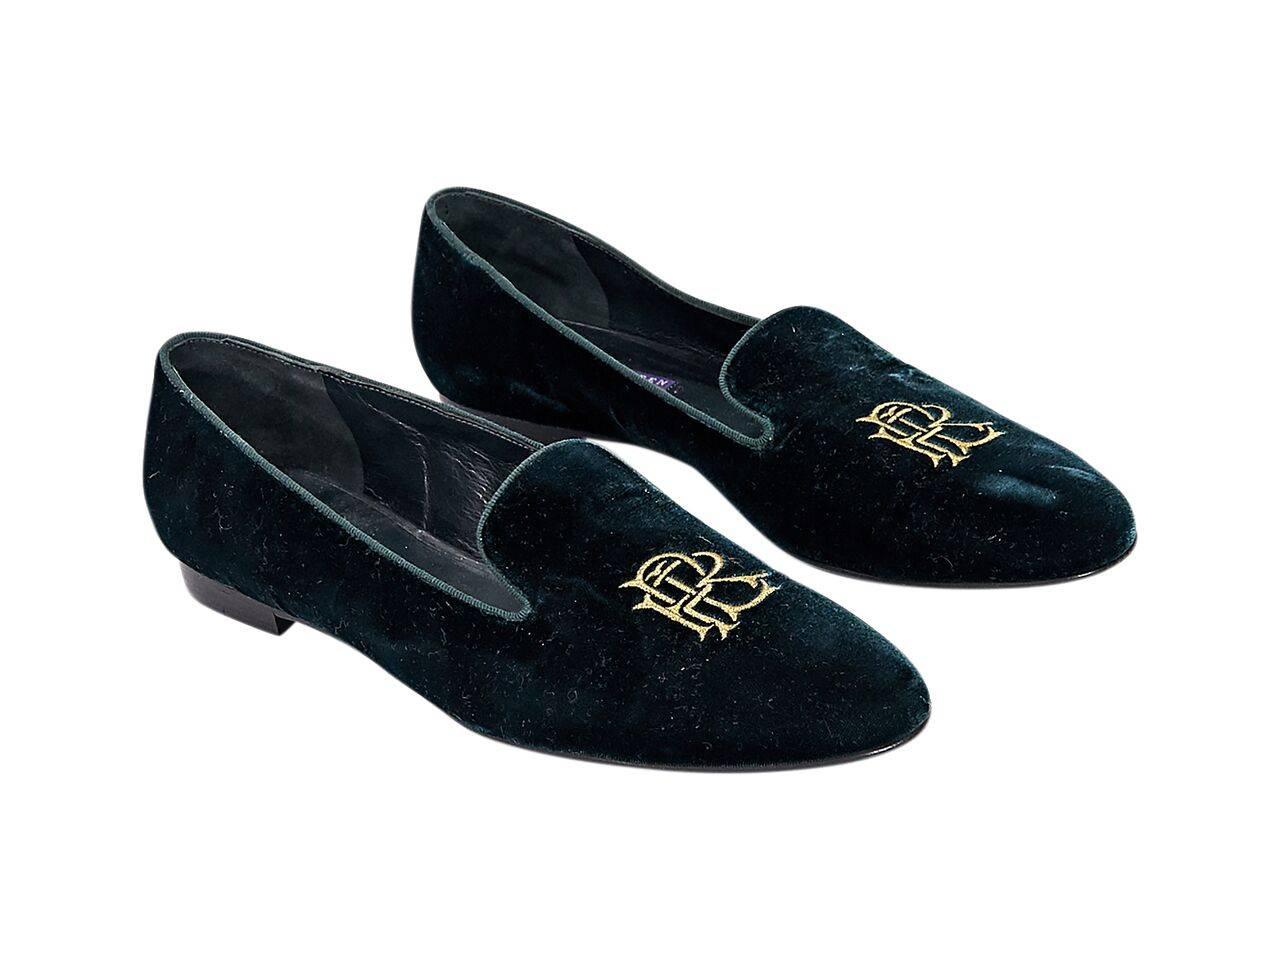 Product details:  Emerald green velvet smoking slippers by Ralph Lauren Collection.  Metallic goldtone embroidered logo.  Round toe.  Slip-on style. 
Condition: Pre-owned. Very good.
Est. Retail $ 498.00